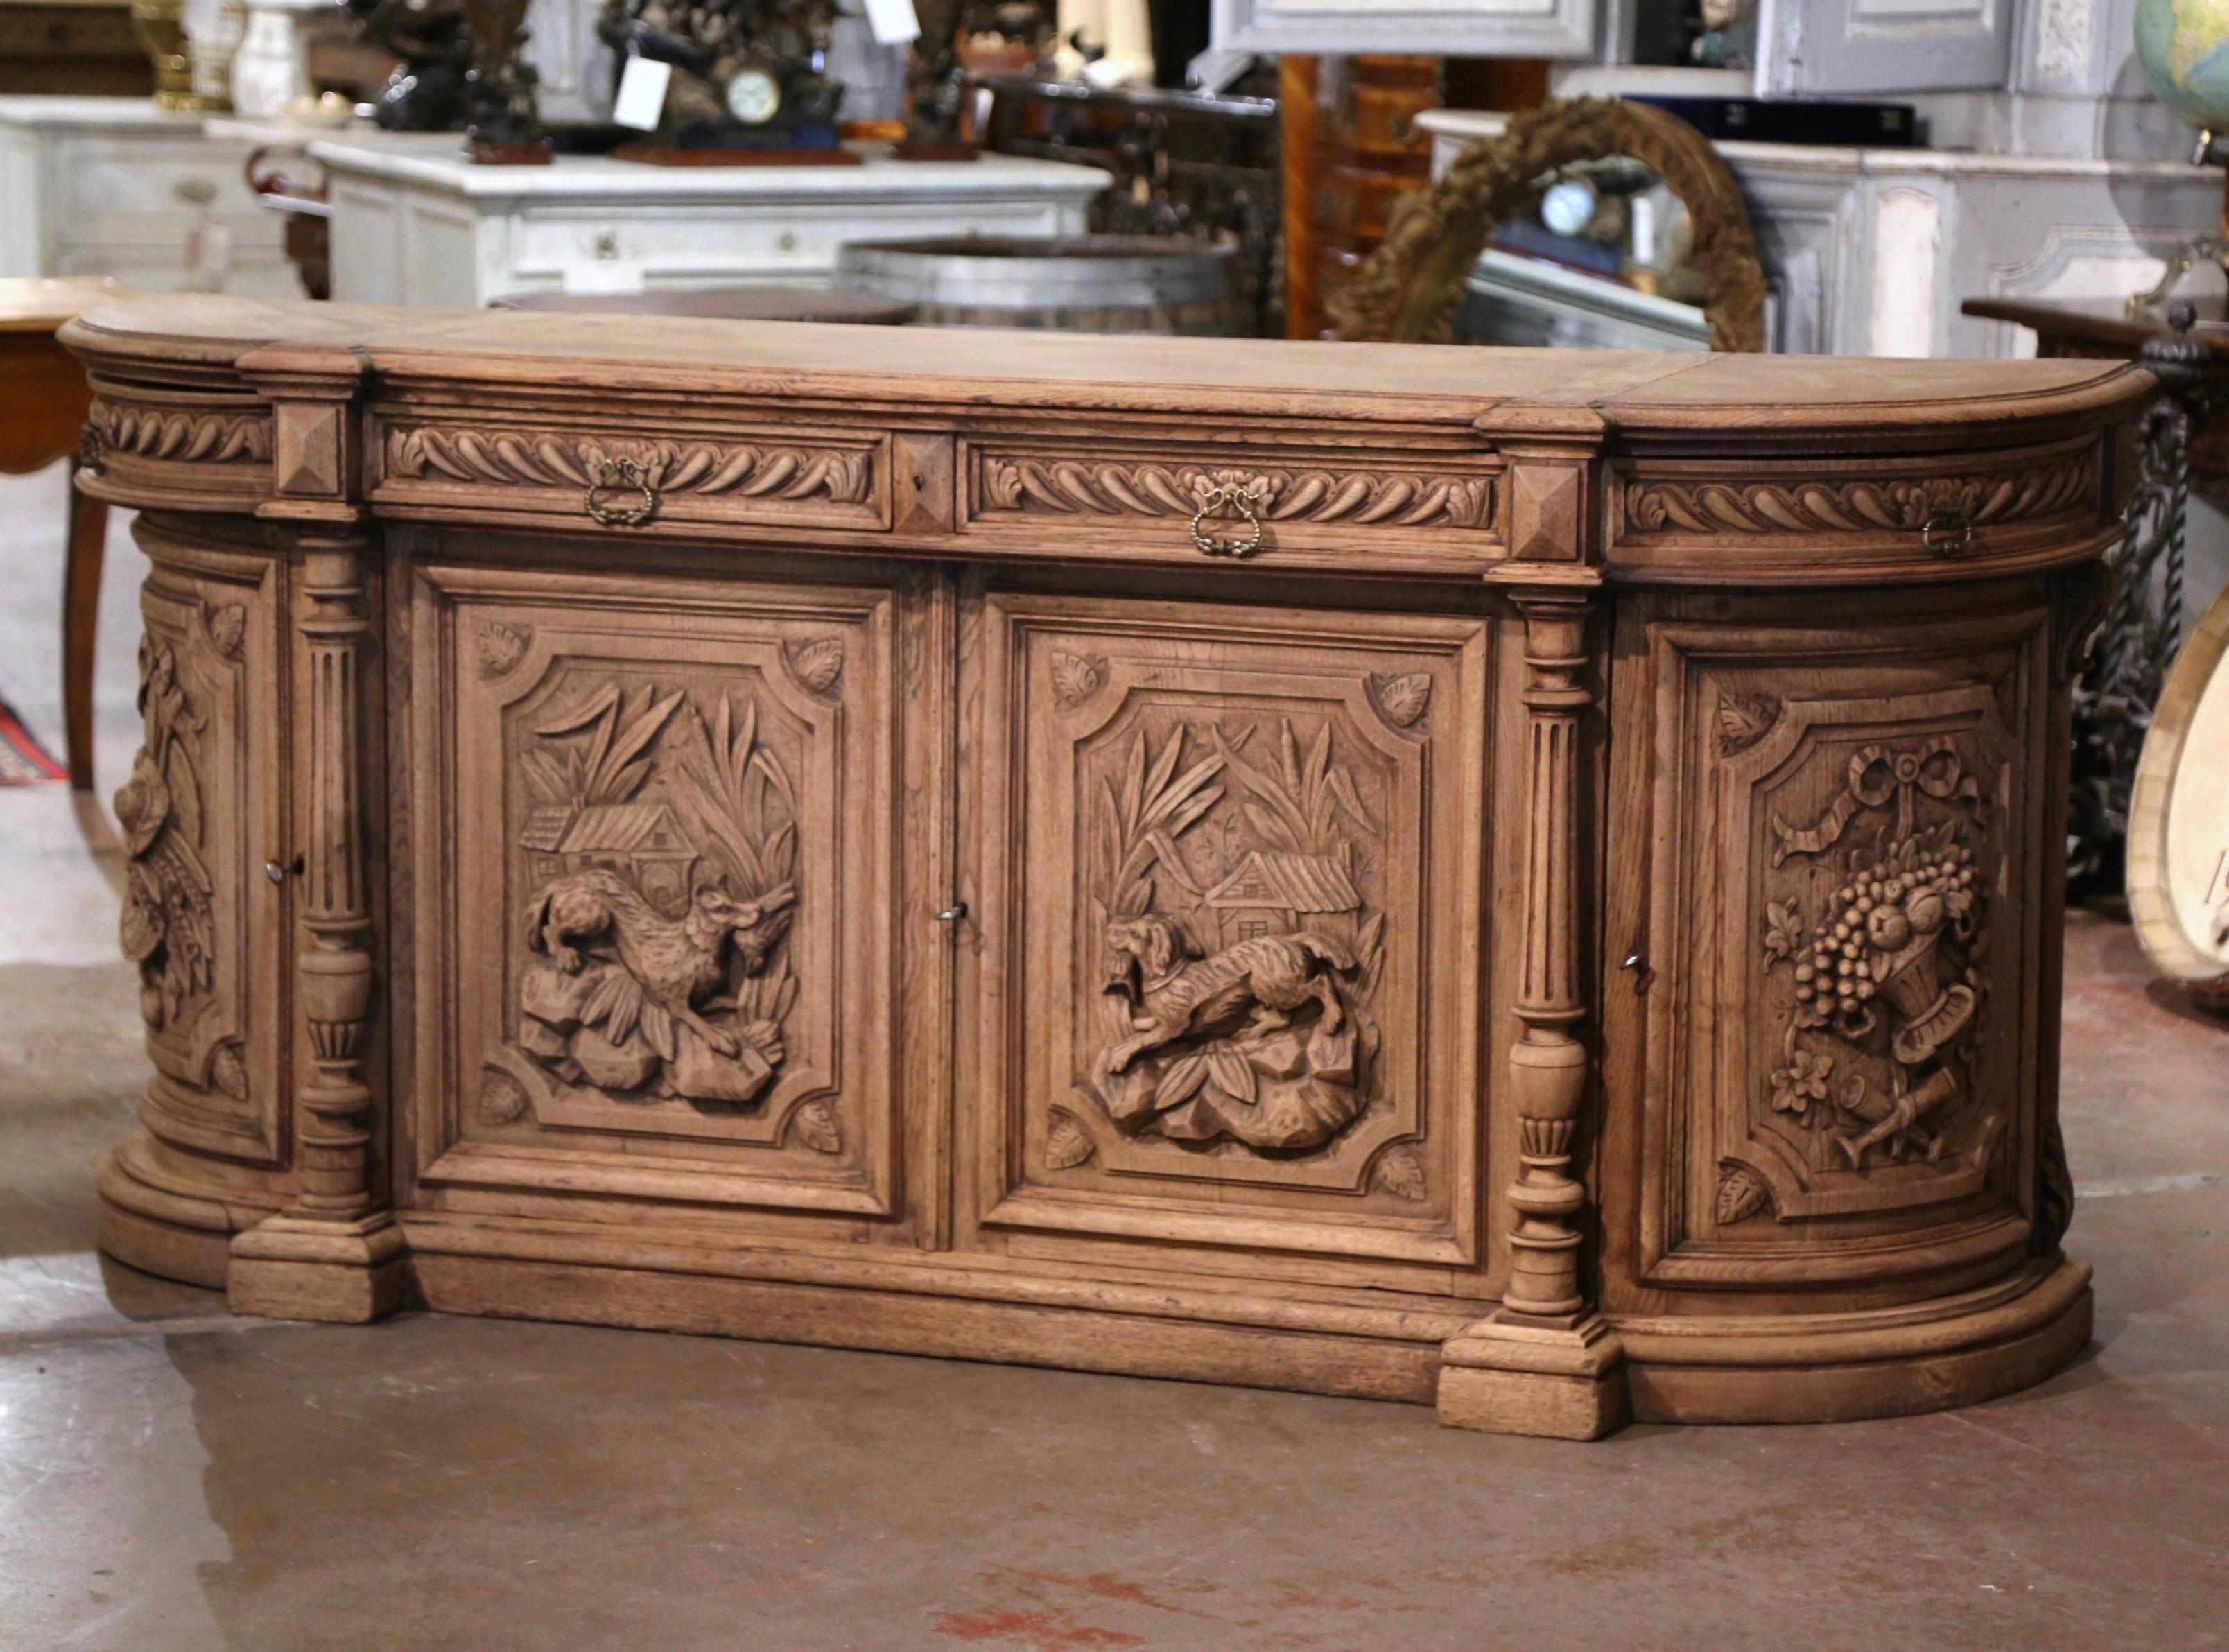 Decorate a ranch or hunting lodge with this important antique four-door sideboard. Crafted in France, circa 1870, the highly detailed buffet with curved sides stands on a wide bottom plinth. The long cabinet features four carved drawers across the